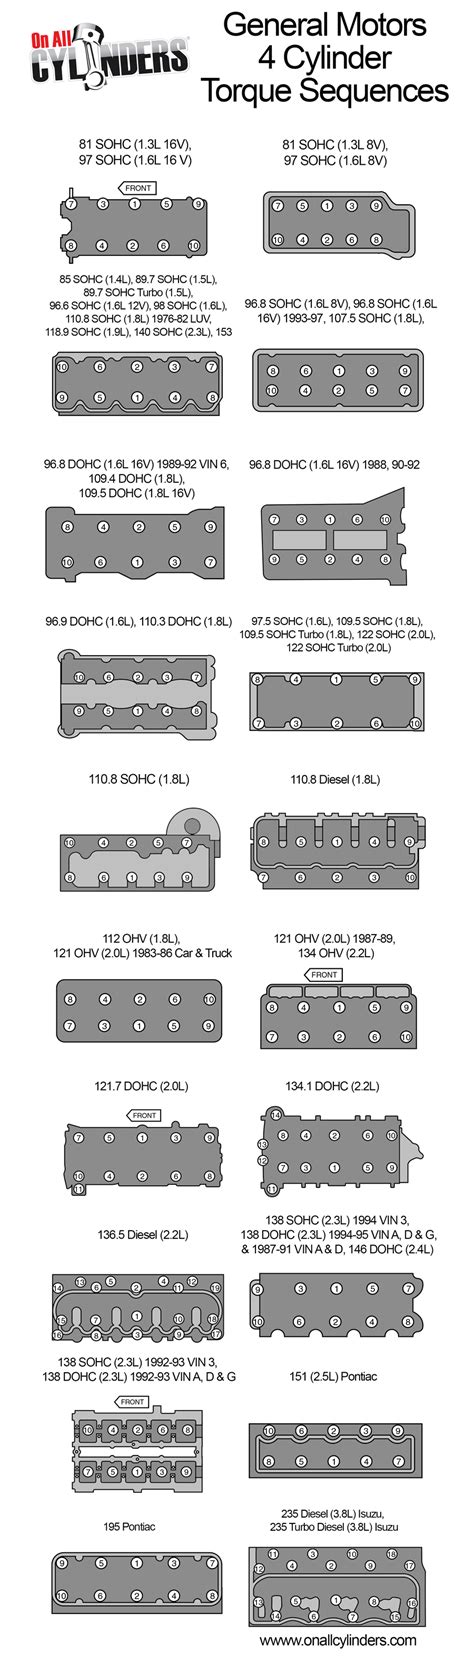 Infographic Cylinder Head Torque Sequences For Gm 4 Cylinder Engines